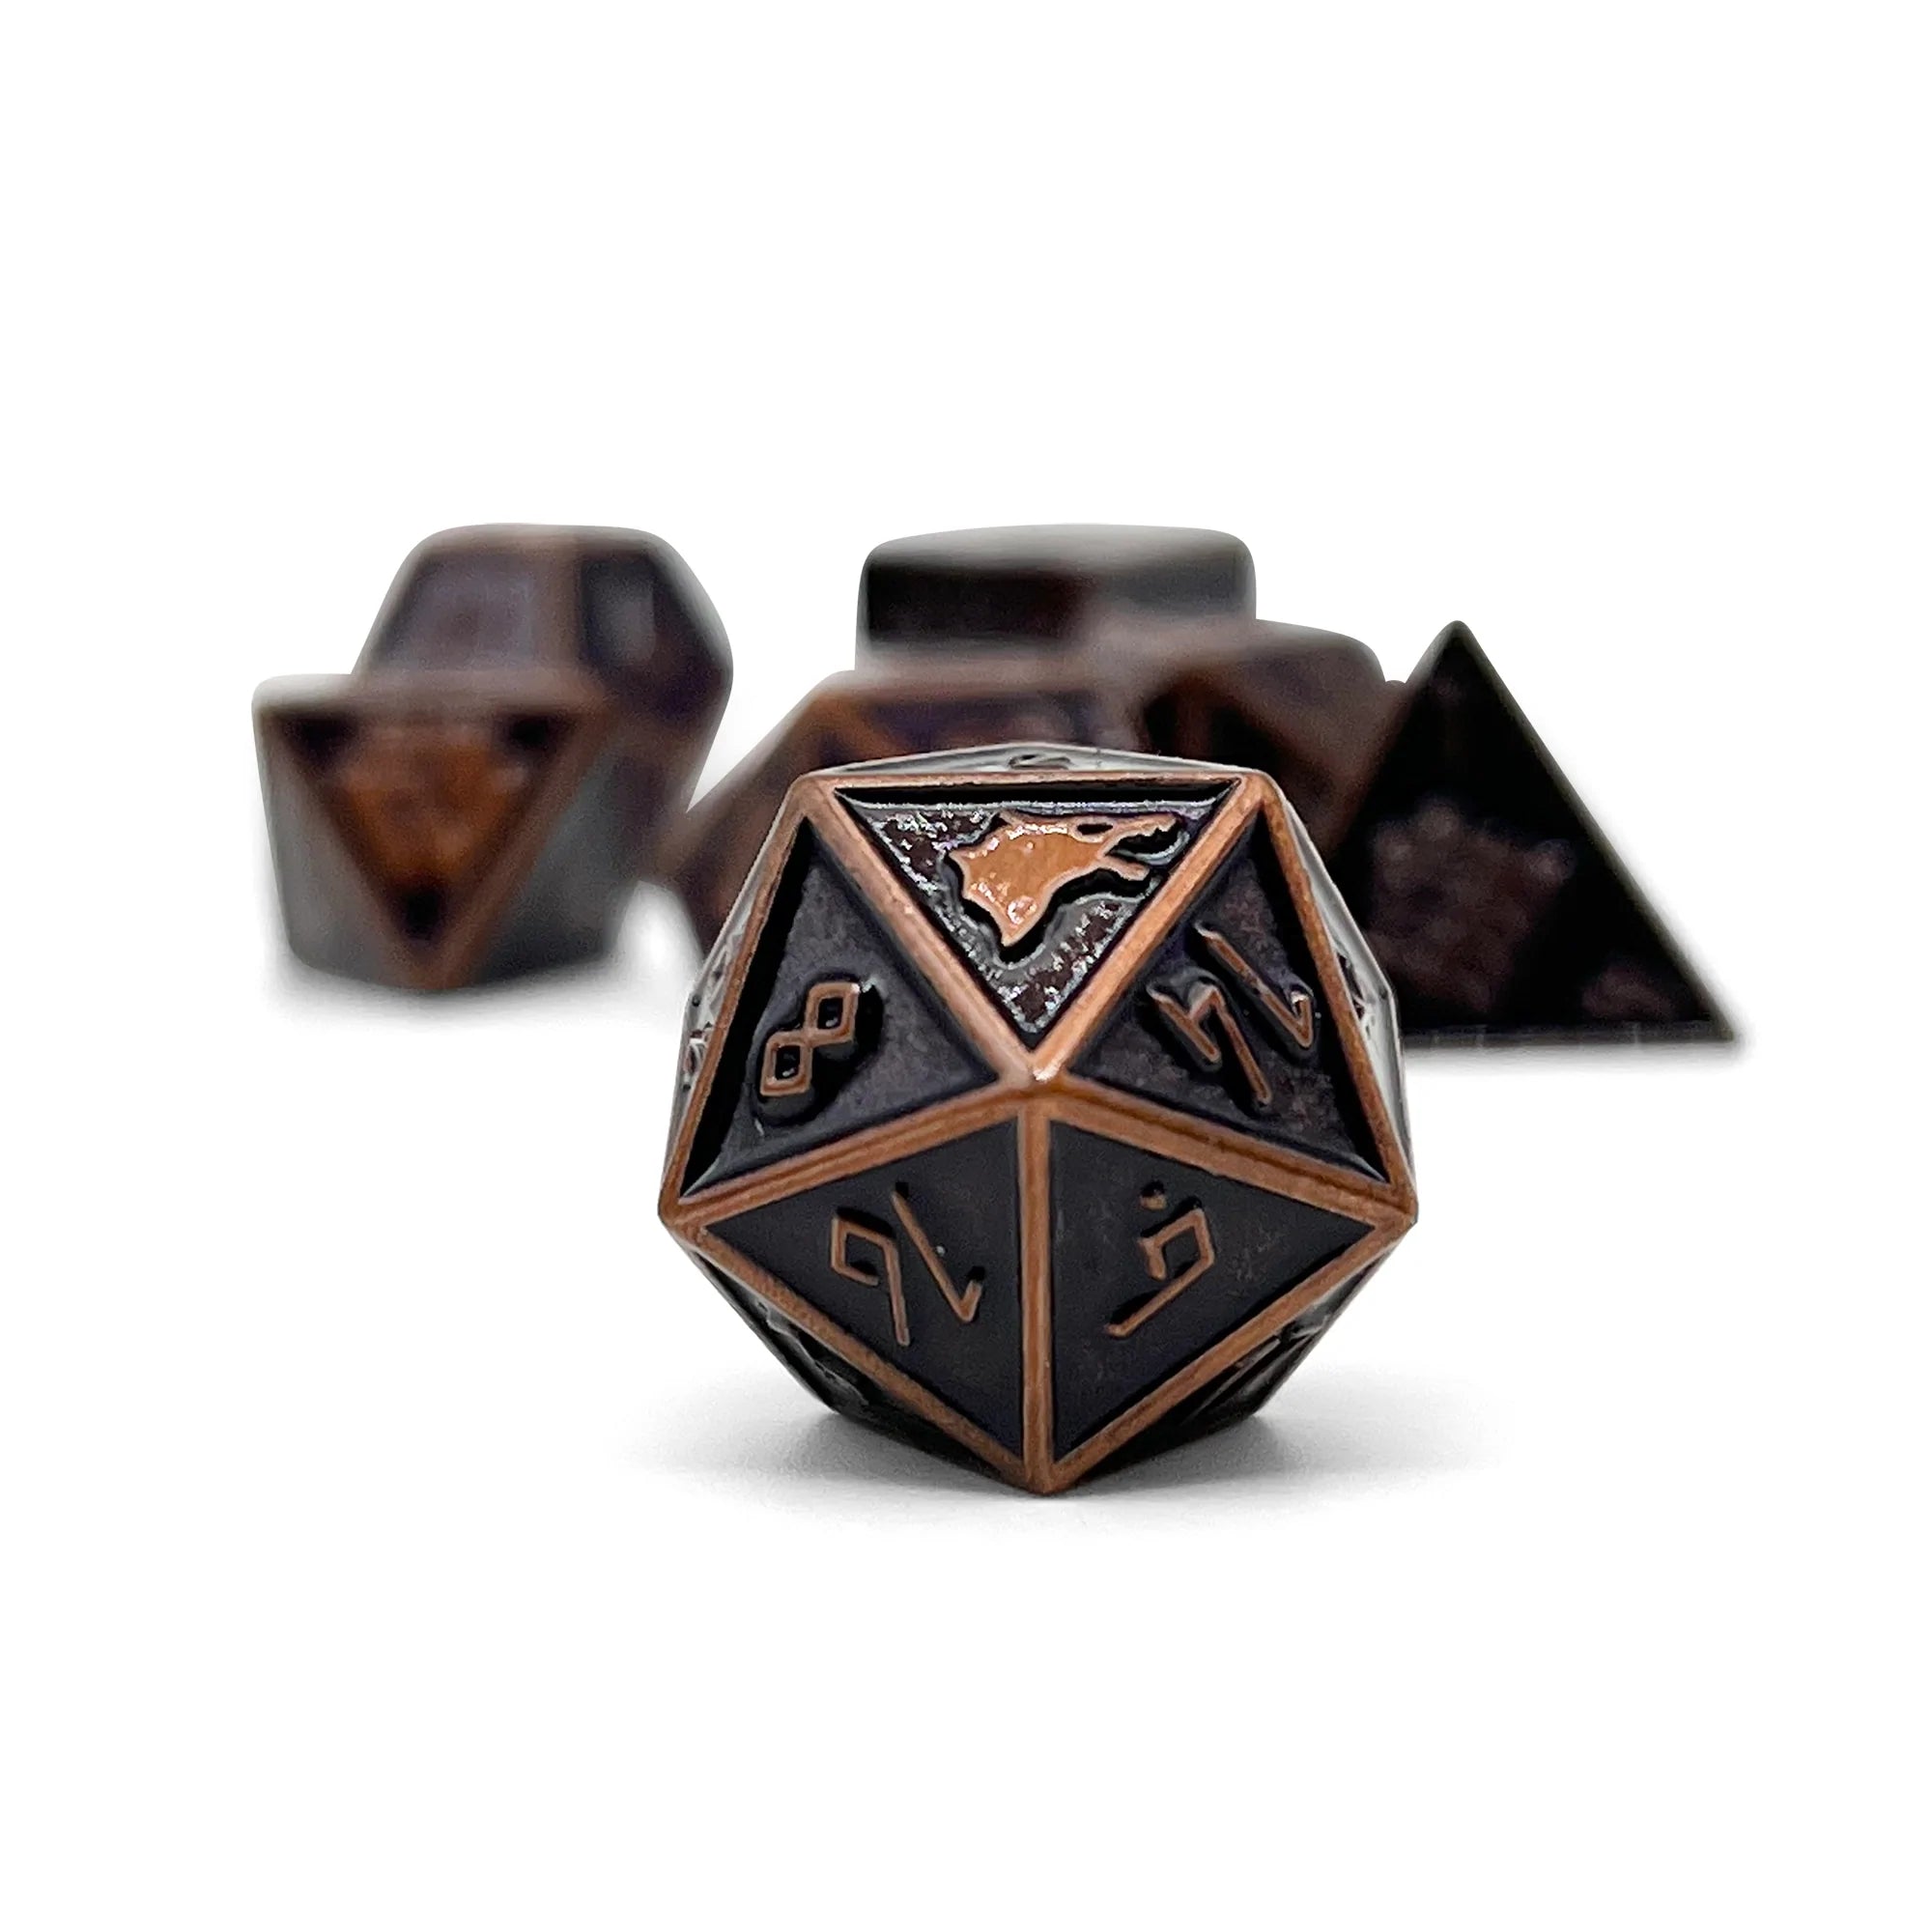 RUST MONSTER - NORSE THEMED METAL DICE SE | Gopher Games